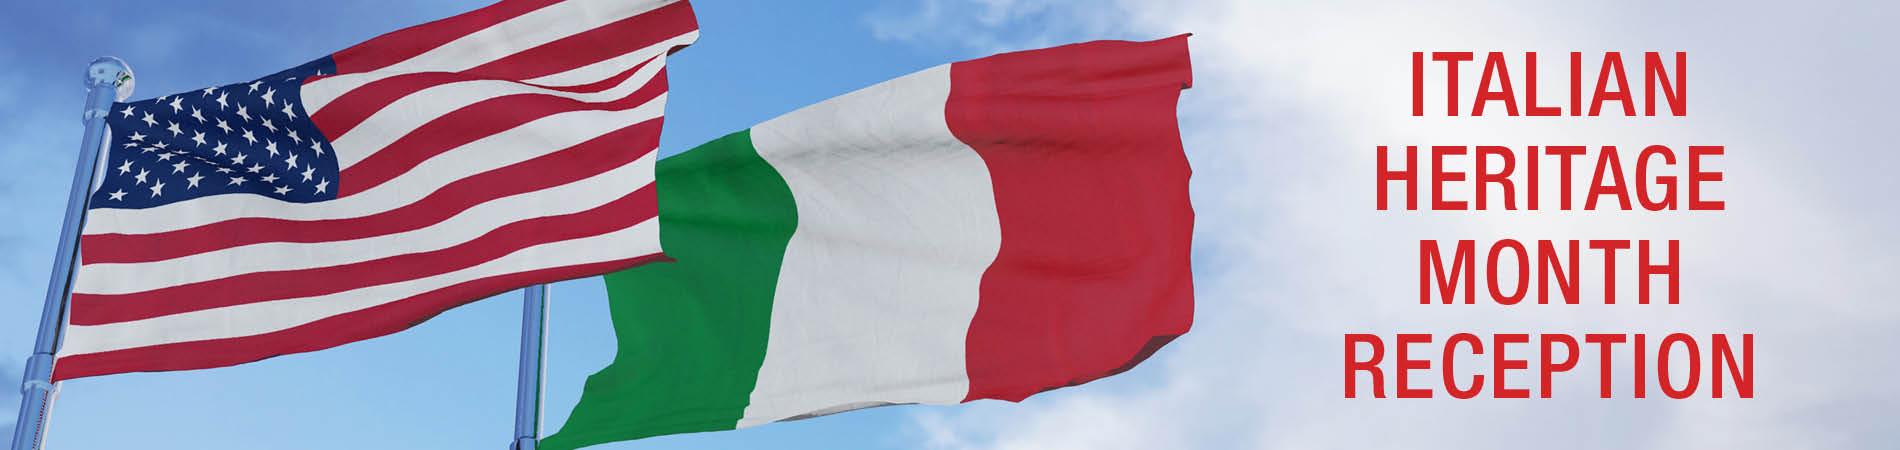 Italian Heritage Month image of American and Italian flags